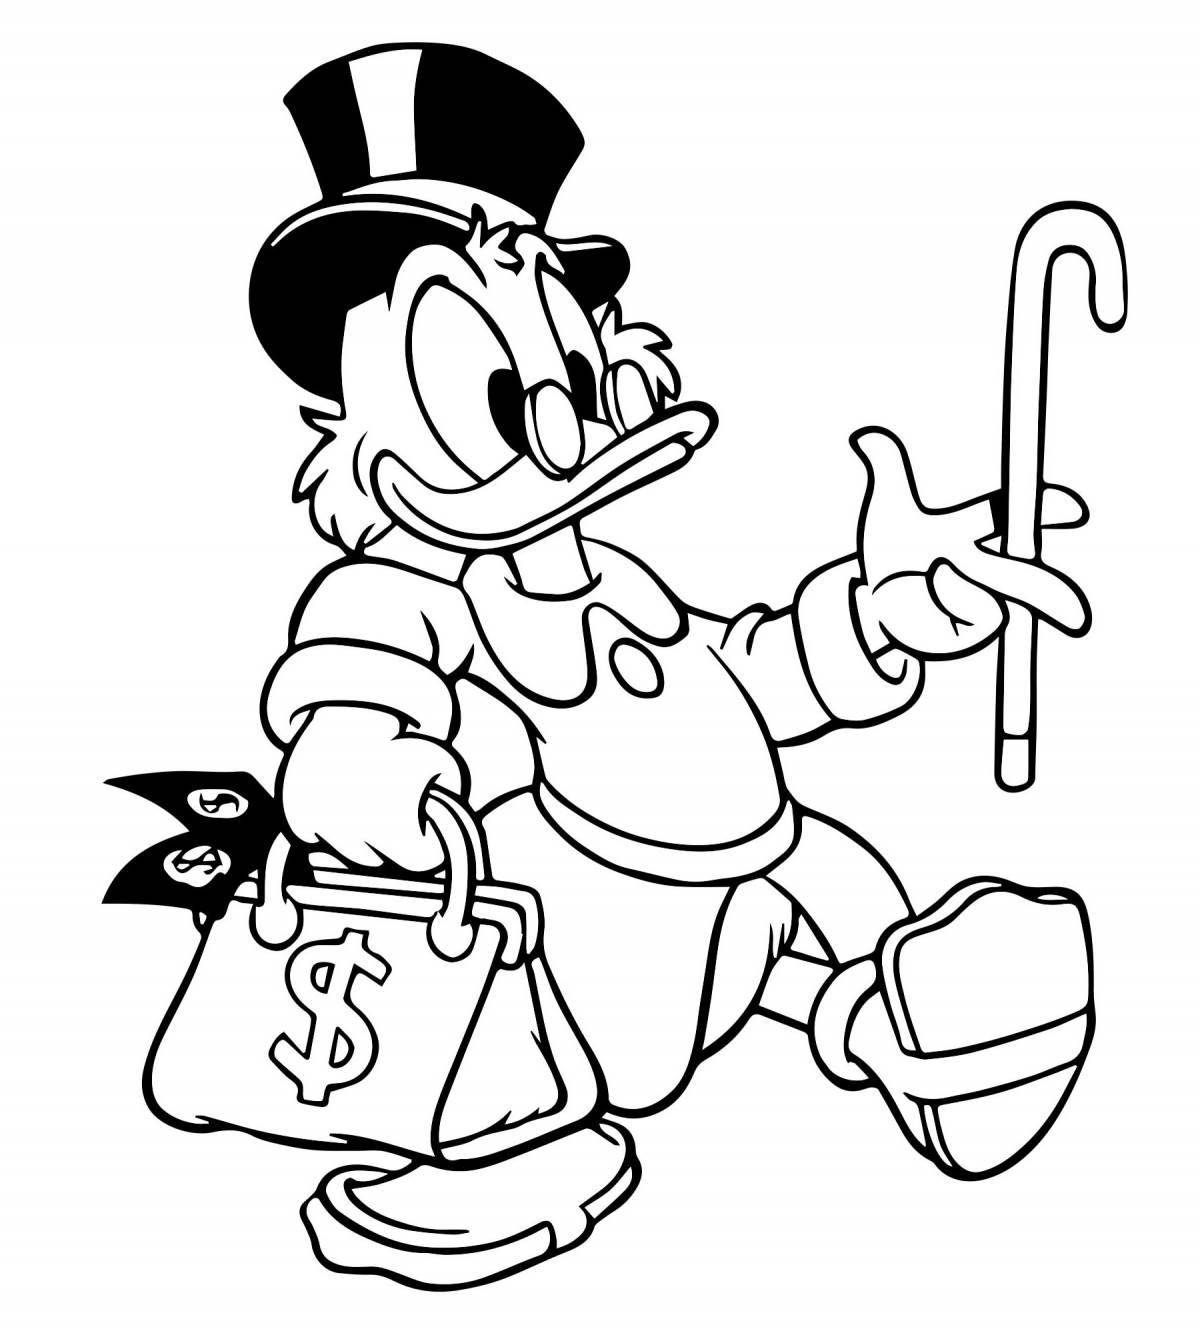 Coloring funny scrooge mcduck